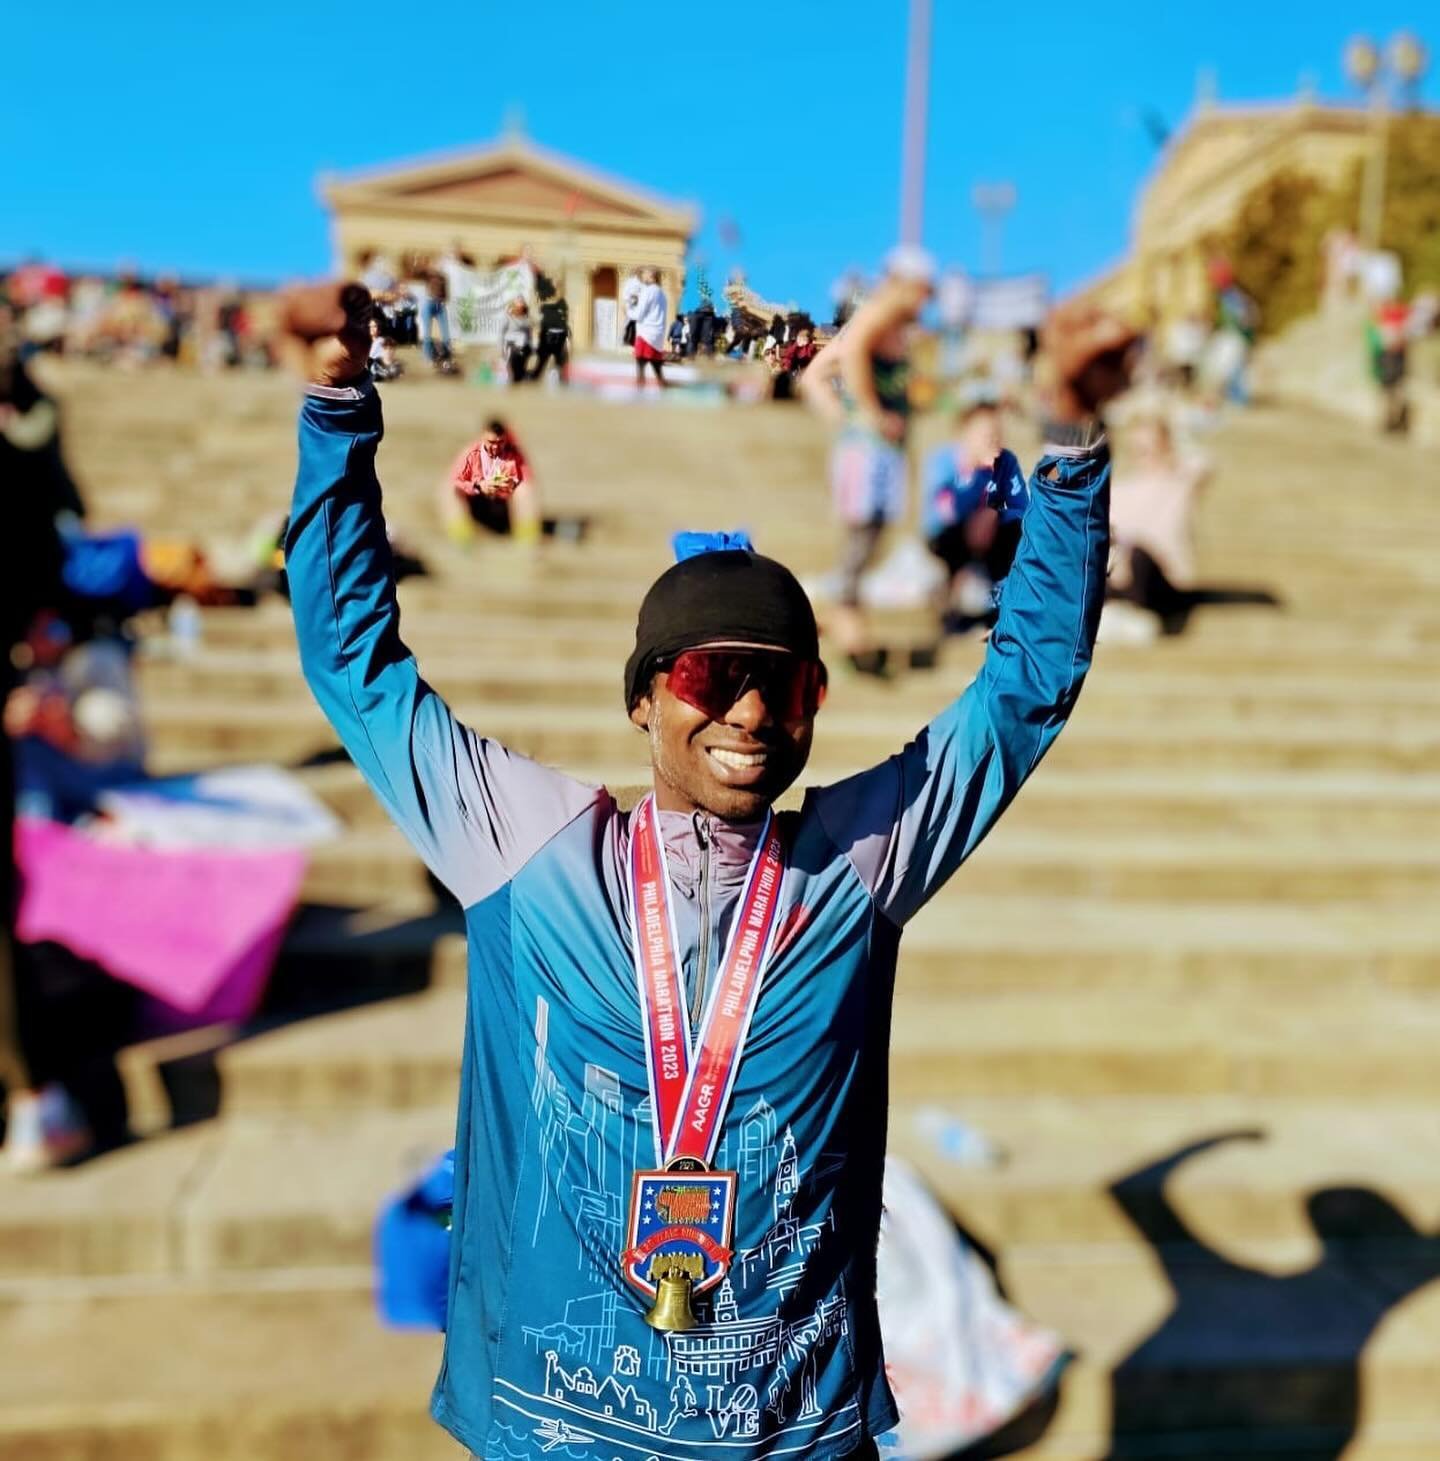 Congratulations to our✌️April &lsquo;24 #RunnerOfTheMonth Kanishak Tekriwal @wandering.wonderer__ 

Ever since he got into running by signing up for the Philadelphia Marathon in 2021, he&rsquo;s been aiming for bigger goals - and has made North Brook